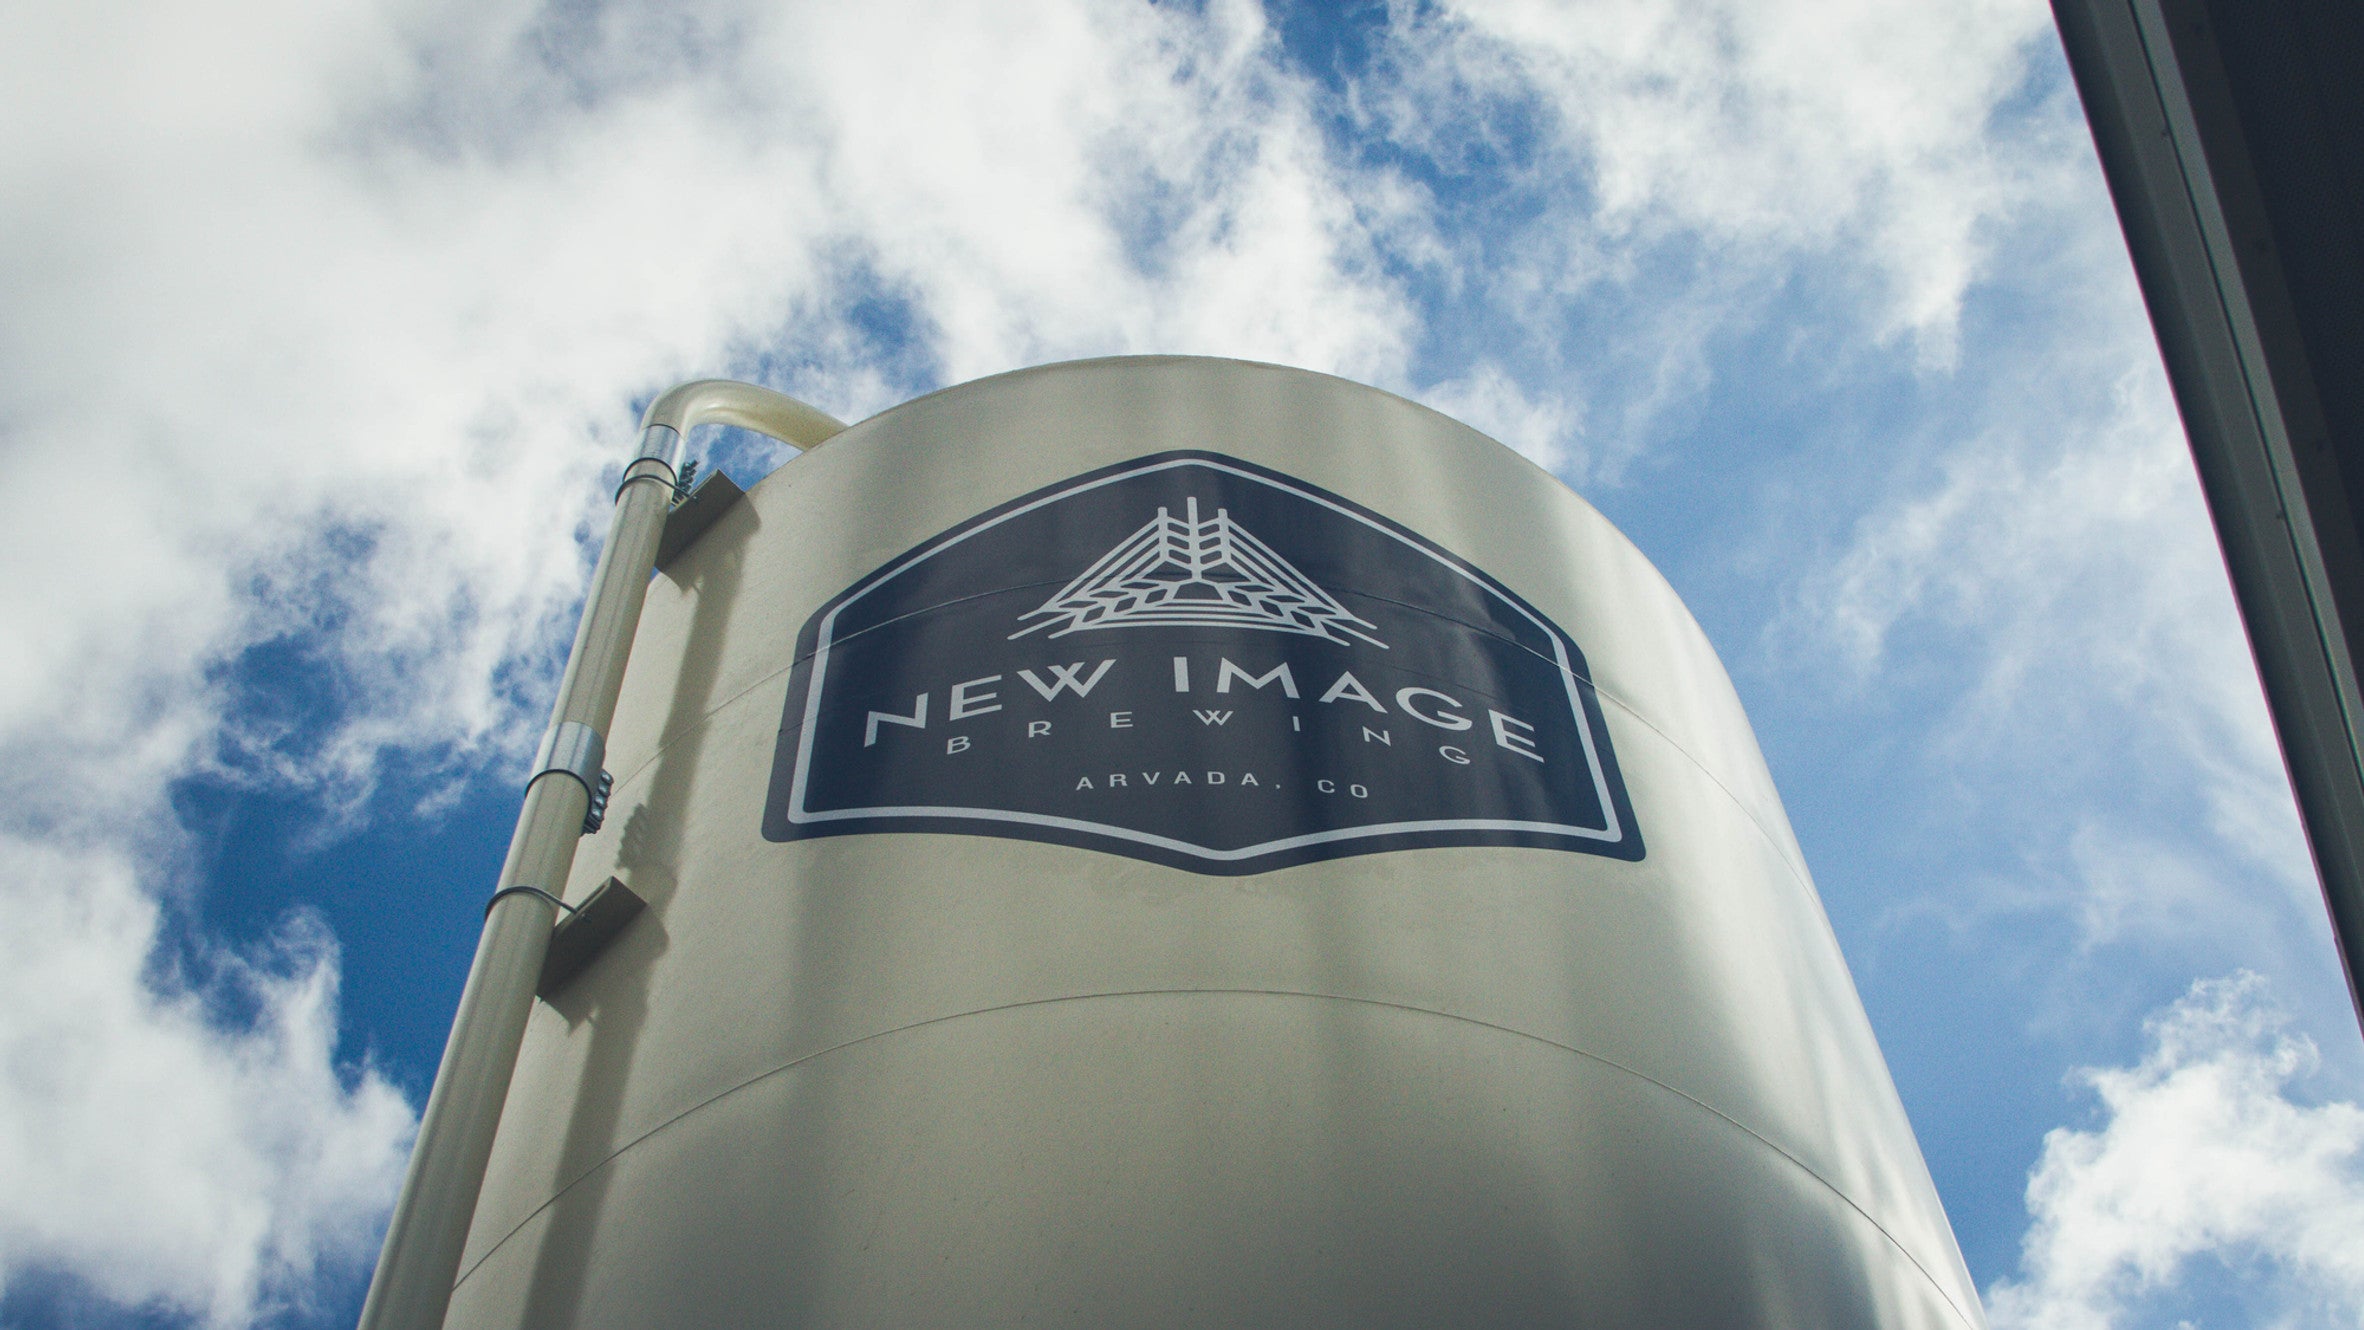 Embracing Changes; Brewery New Image